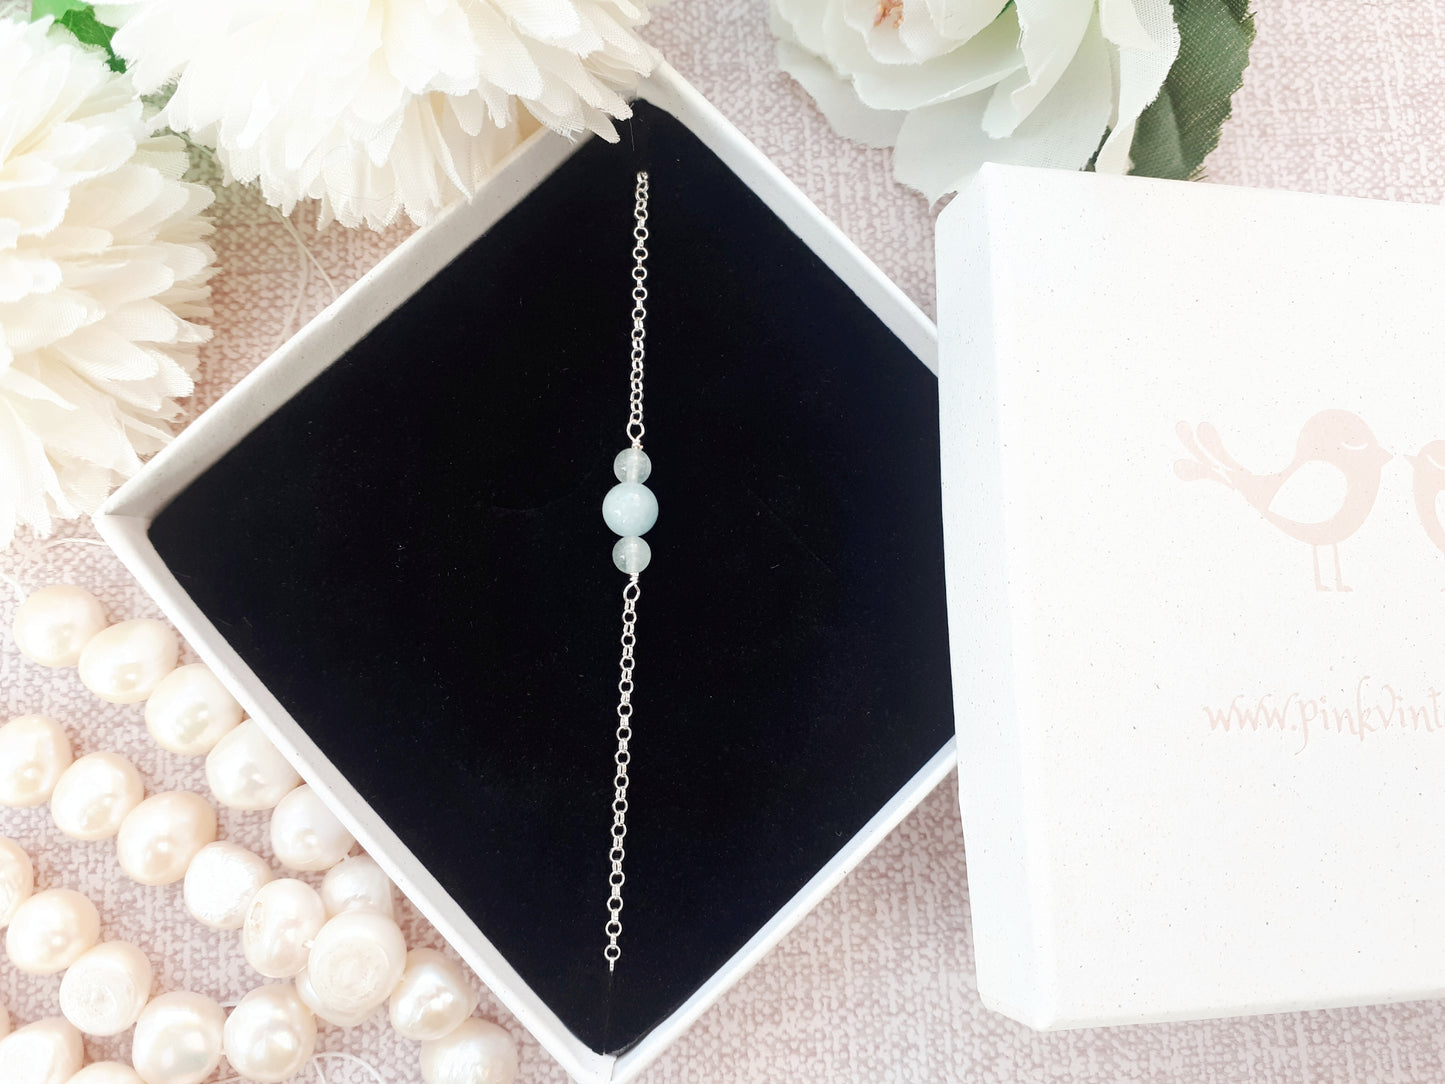 Aquamarine anklet sterling silver. March birthstone gift.